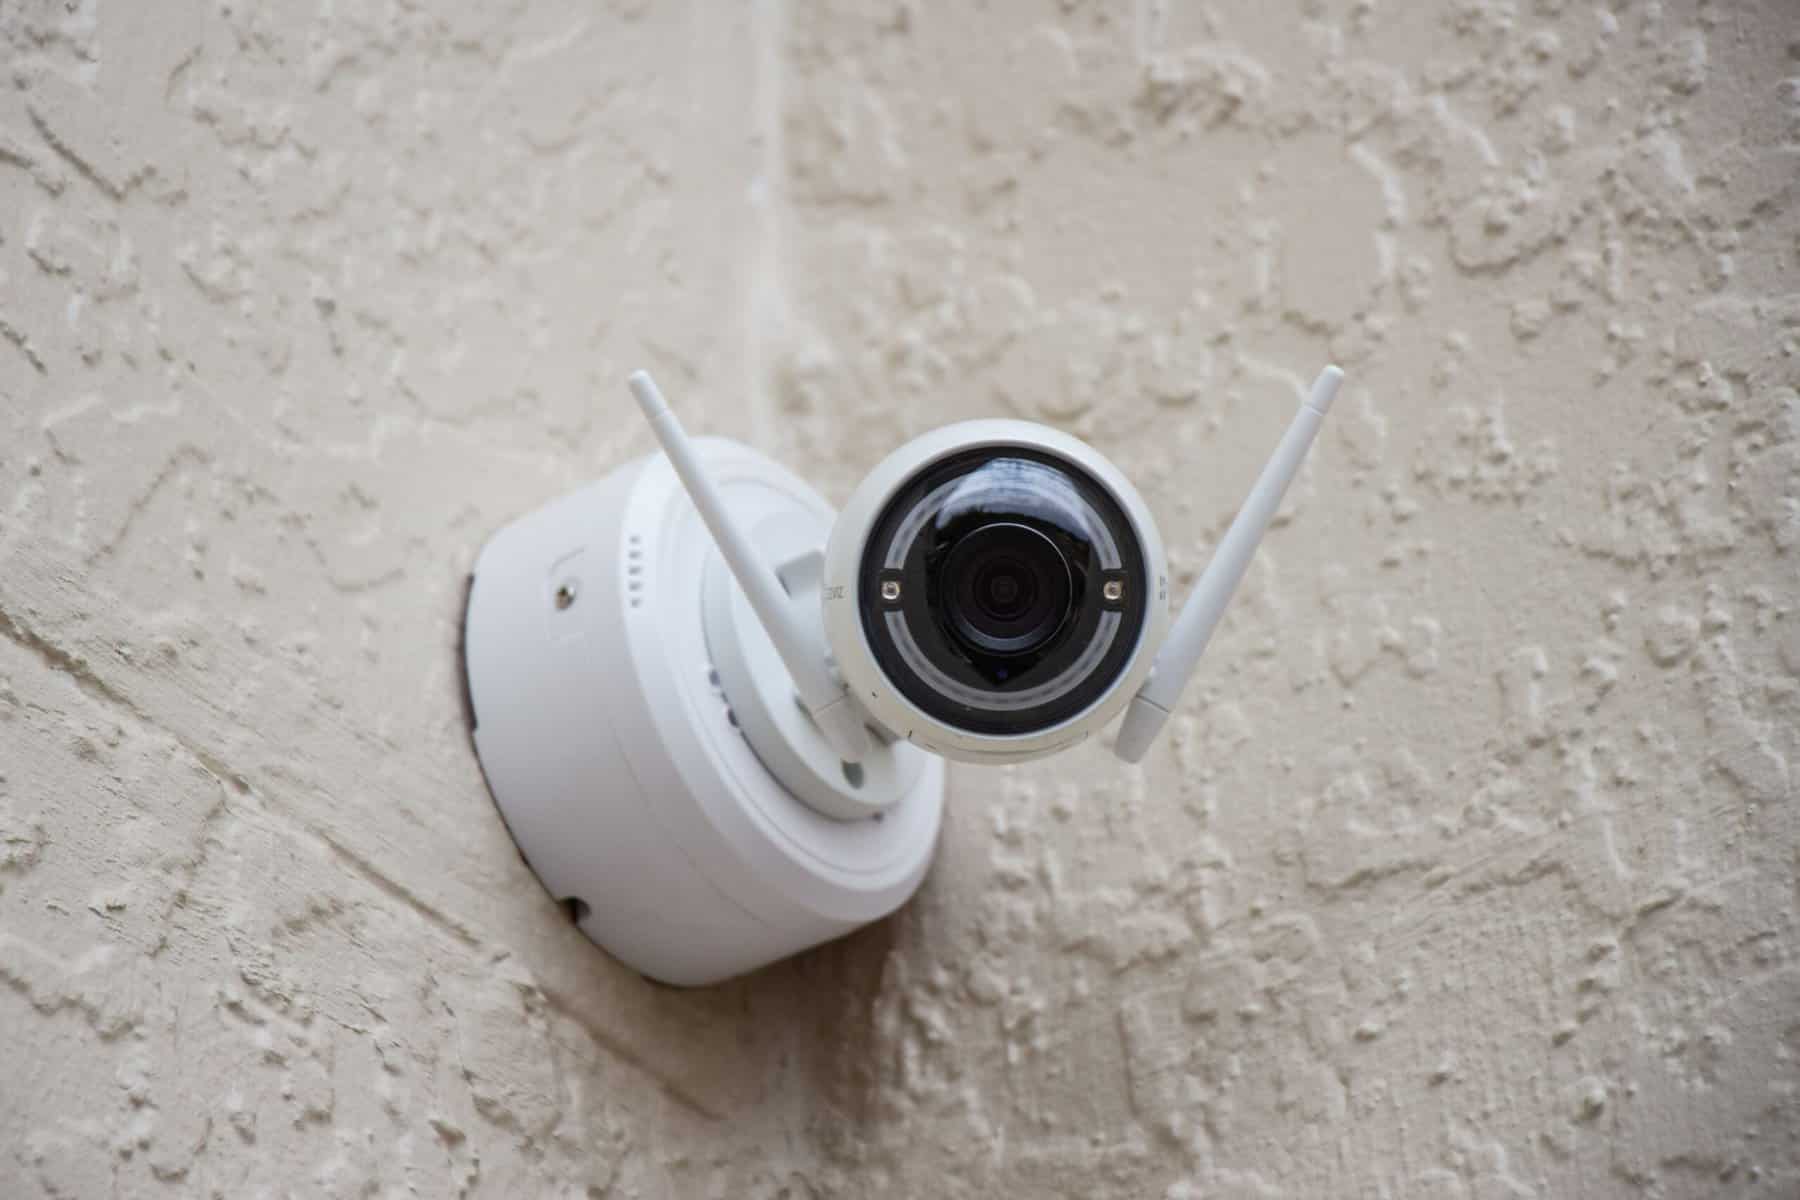 A wireless security camera mounted to a wall.